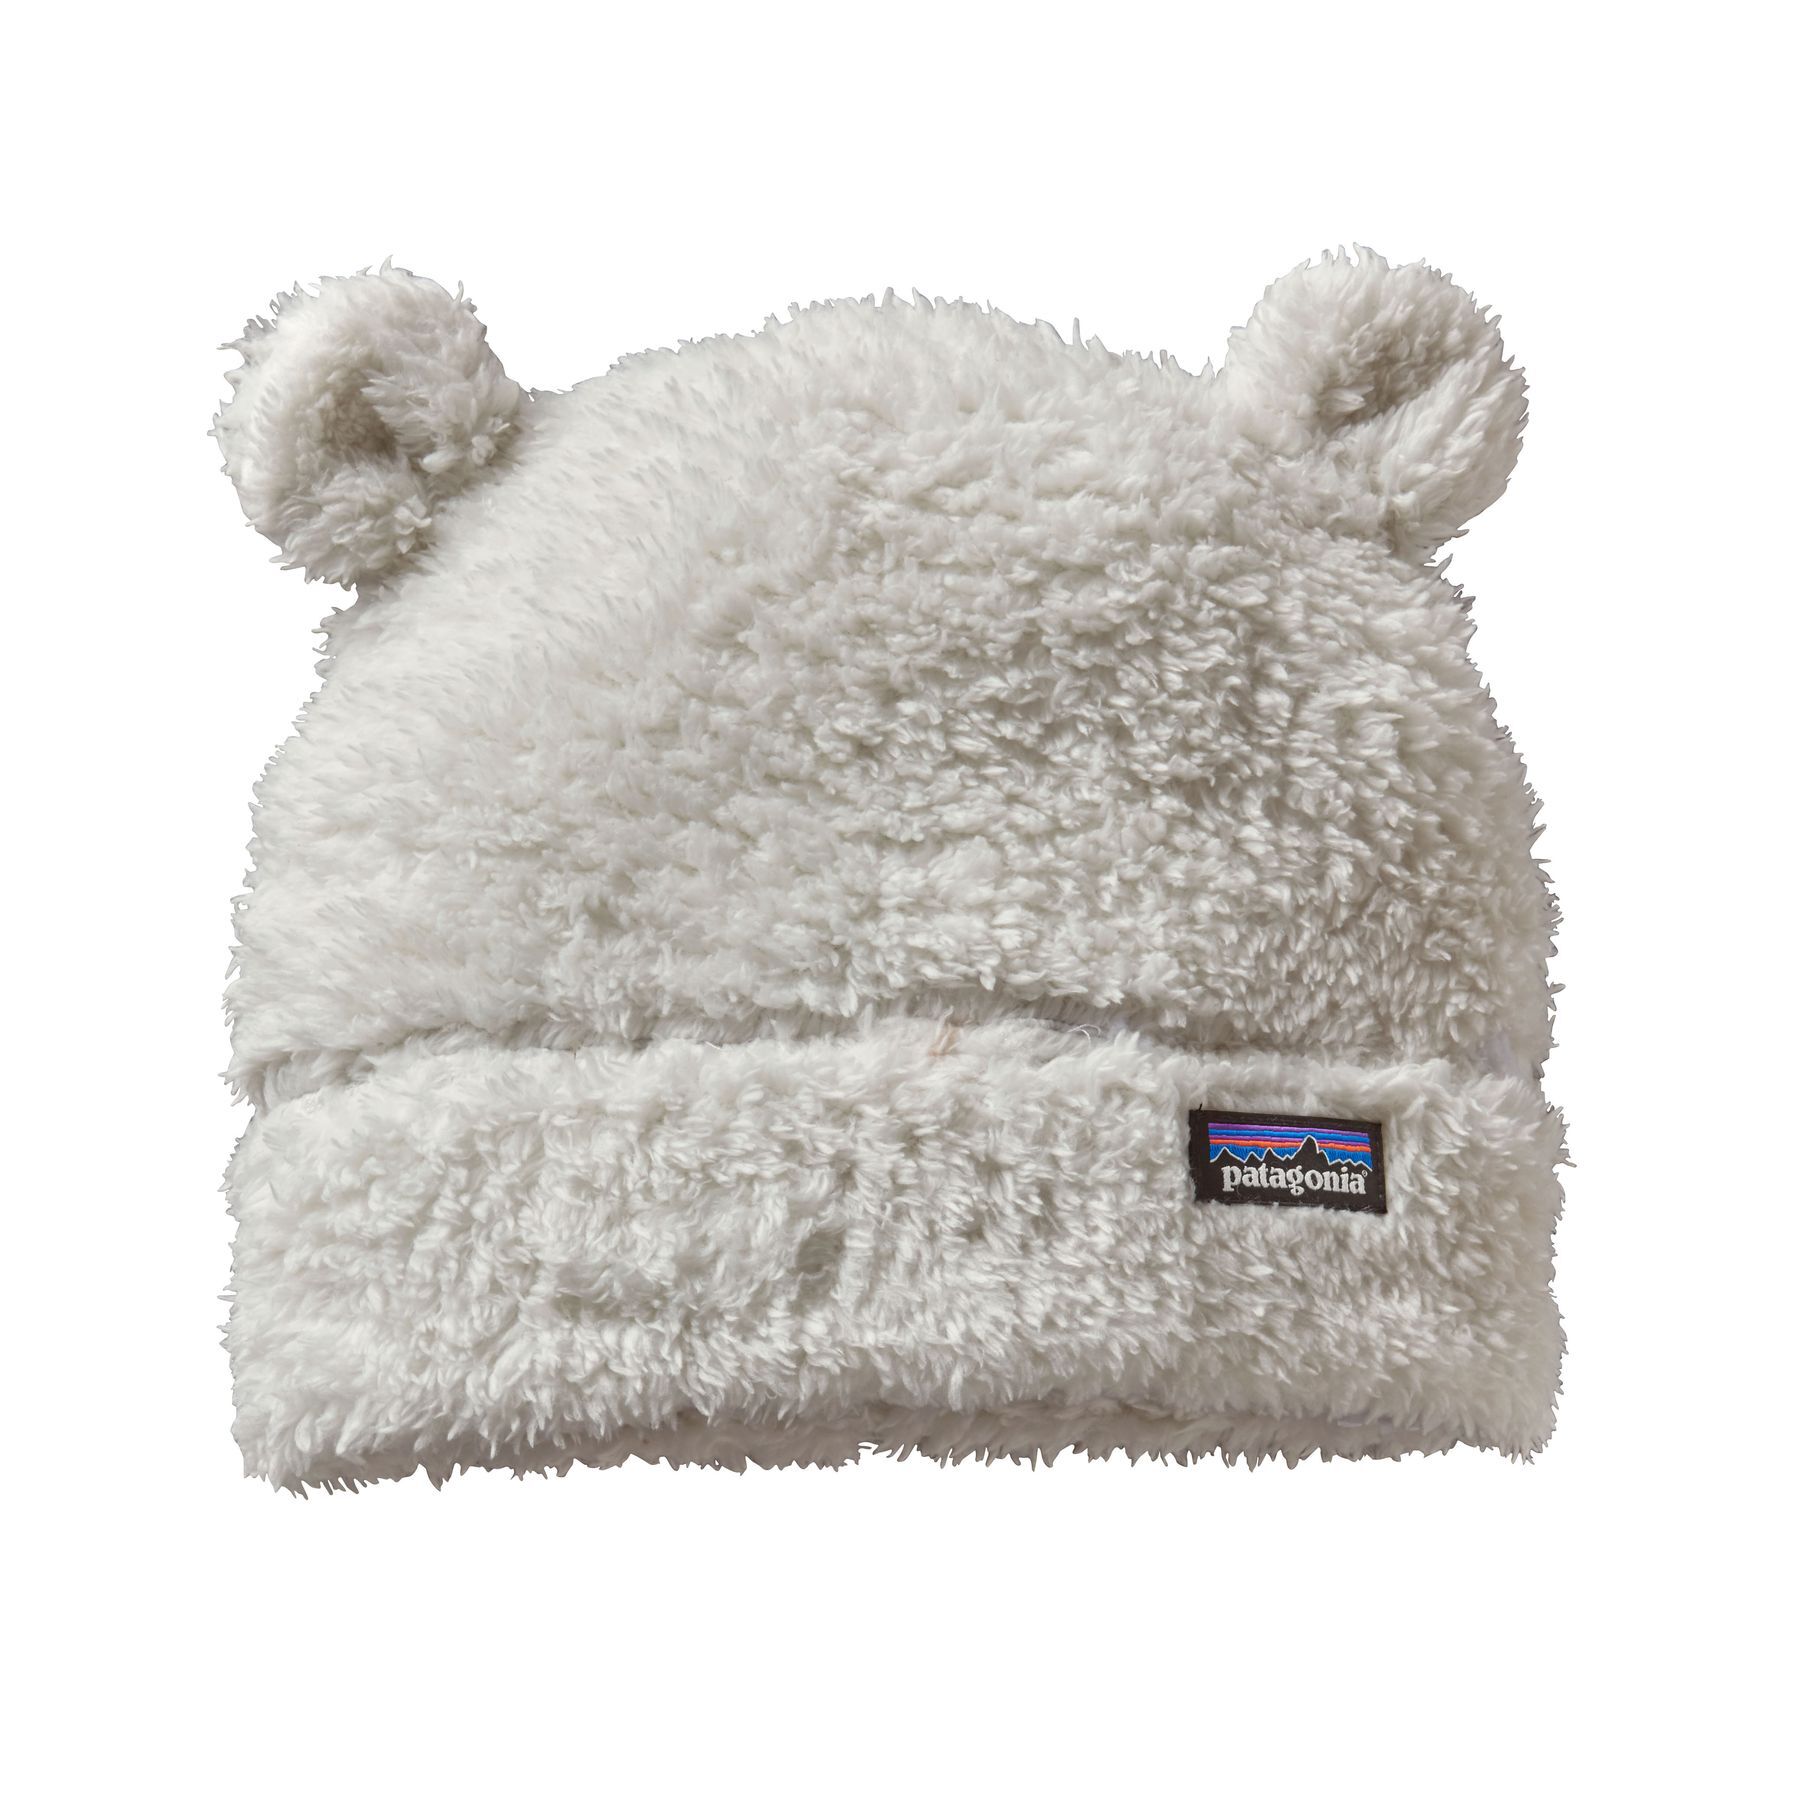 Patagonia - Baby Furry Friends Hat - Beanie - Baby